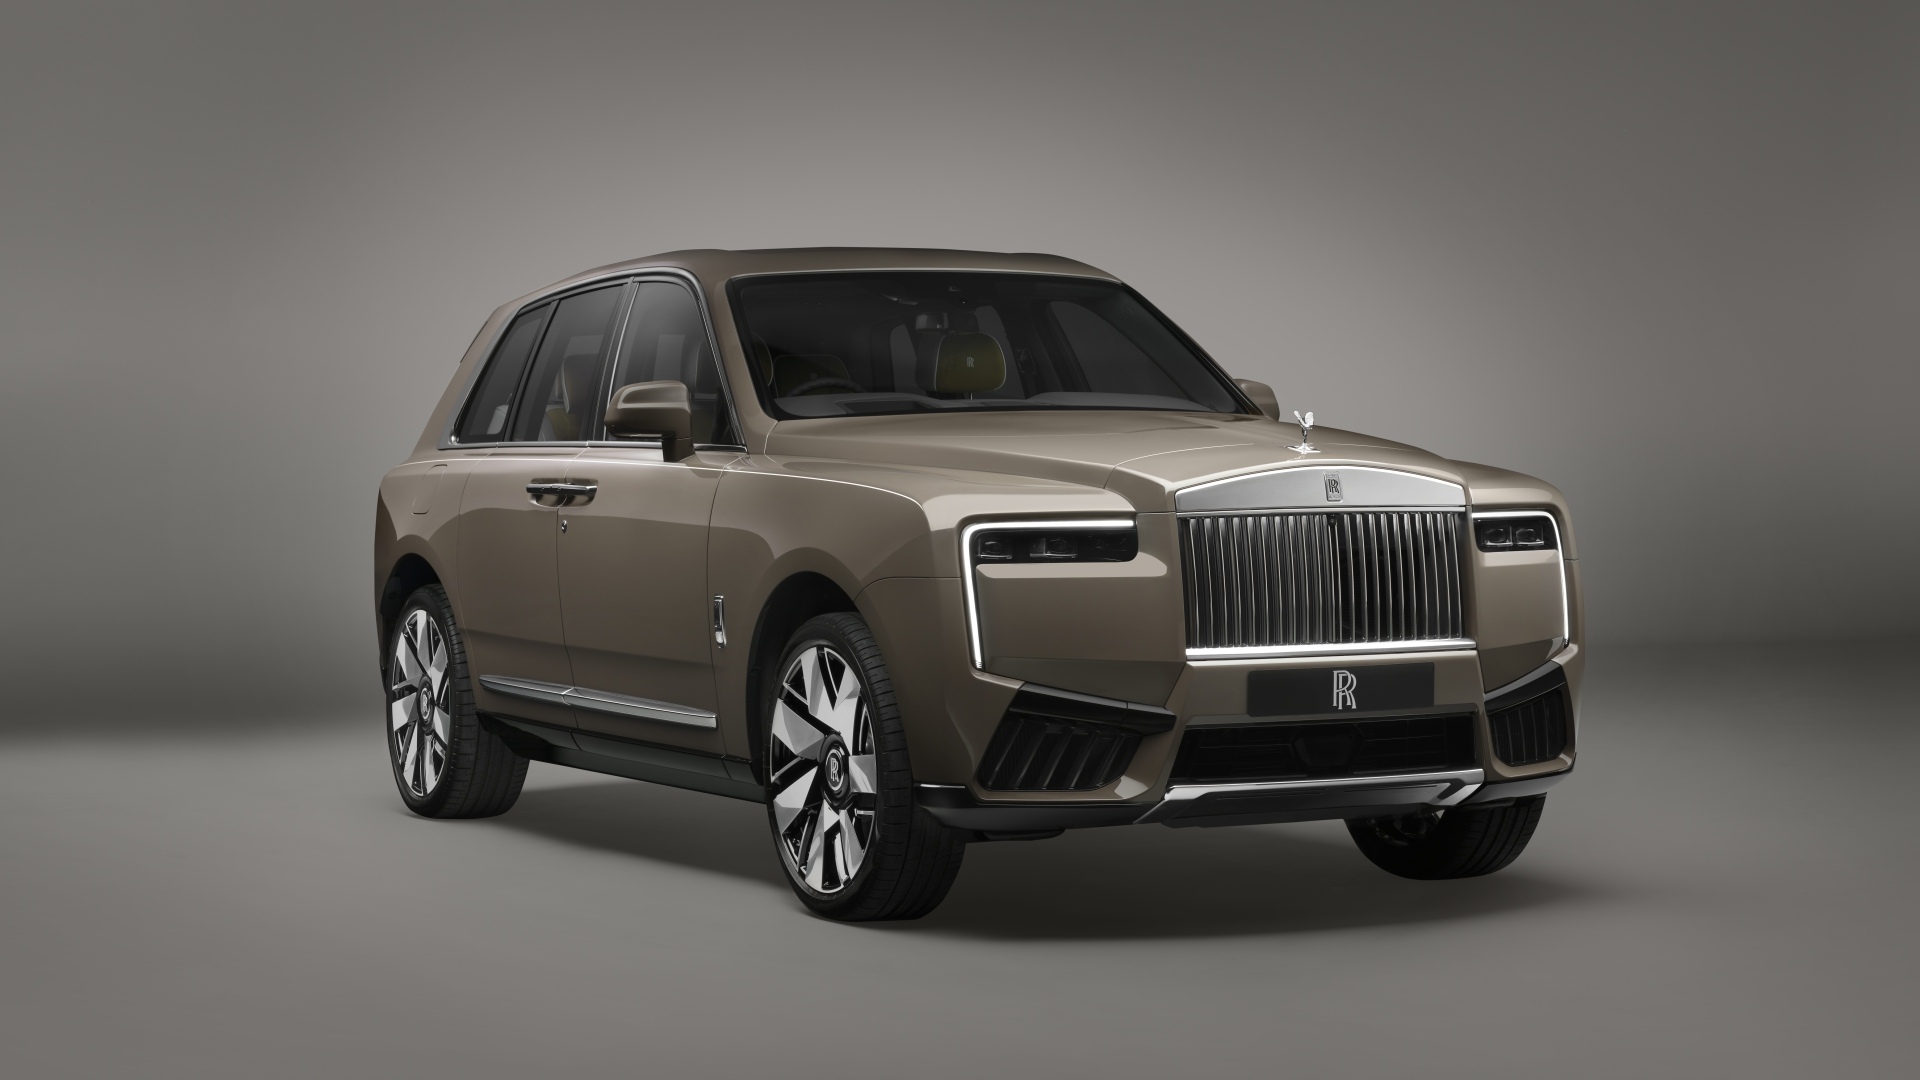 The Front And Side Profiles Of The New Rolls-Royce Cullinan Series II